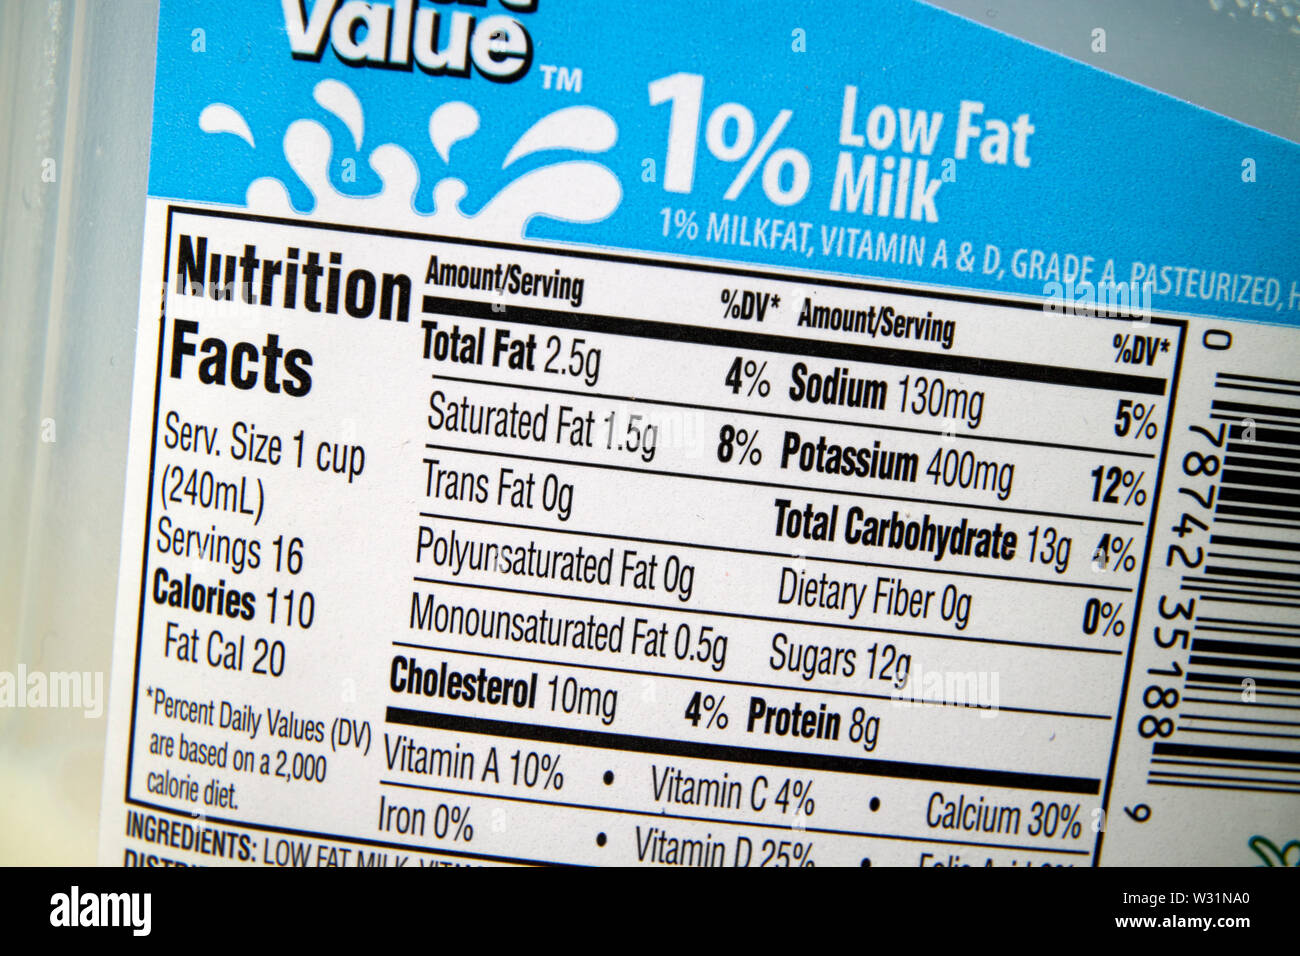 nutrition facts food labelling on 1% low fat milk USA United States of America Stock Photo